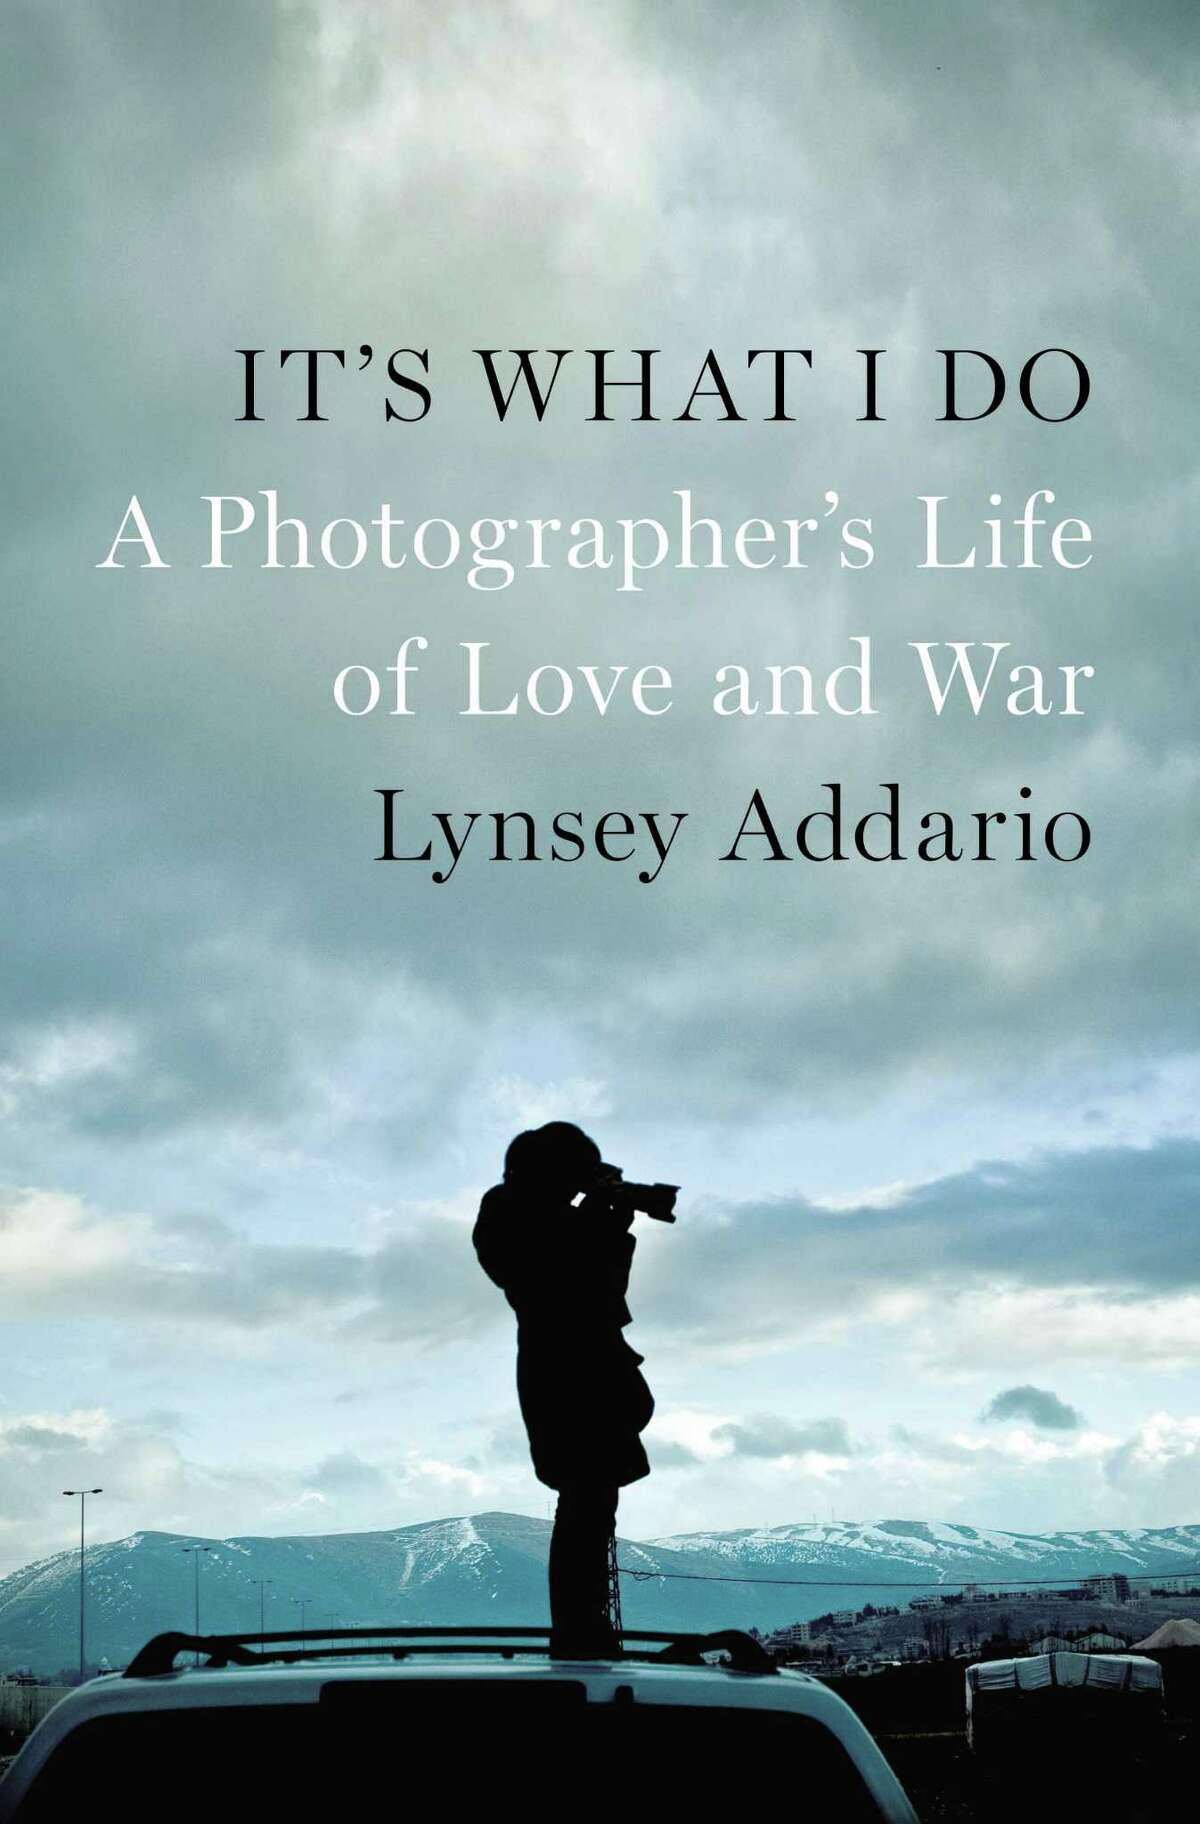 "It's What I Do: A Photographer's Life of Love and War," by Lynsey Addario